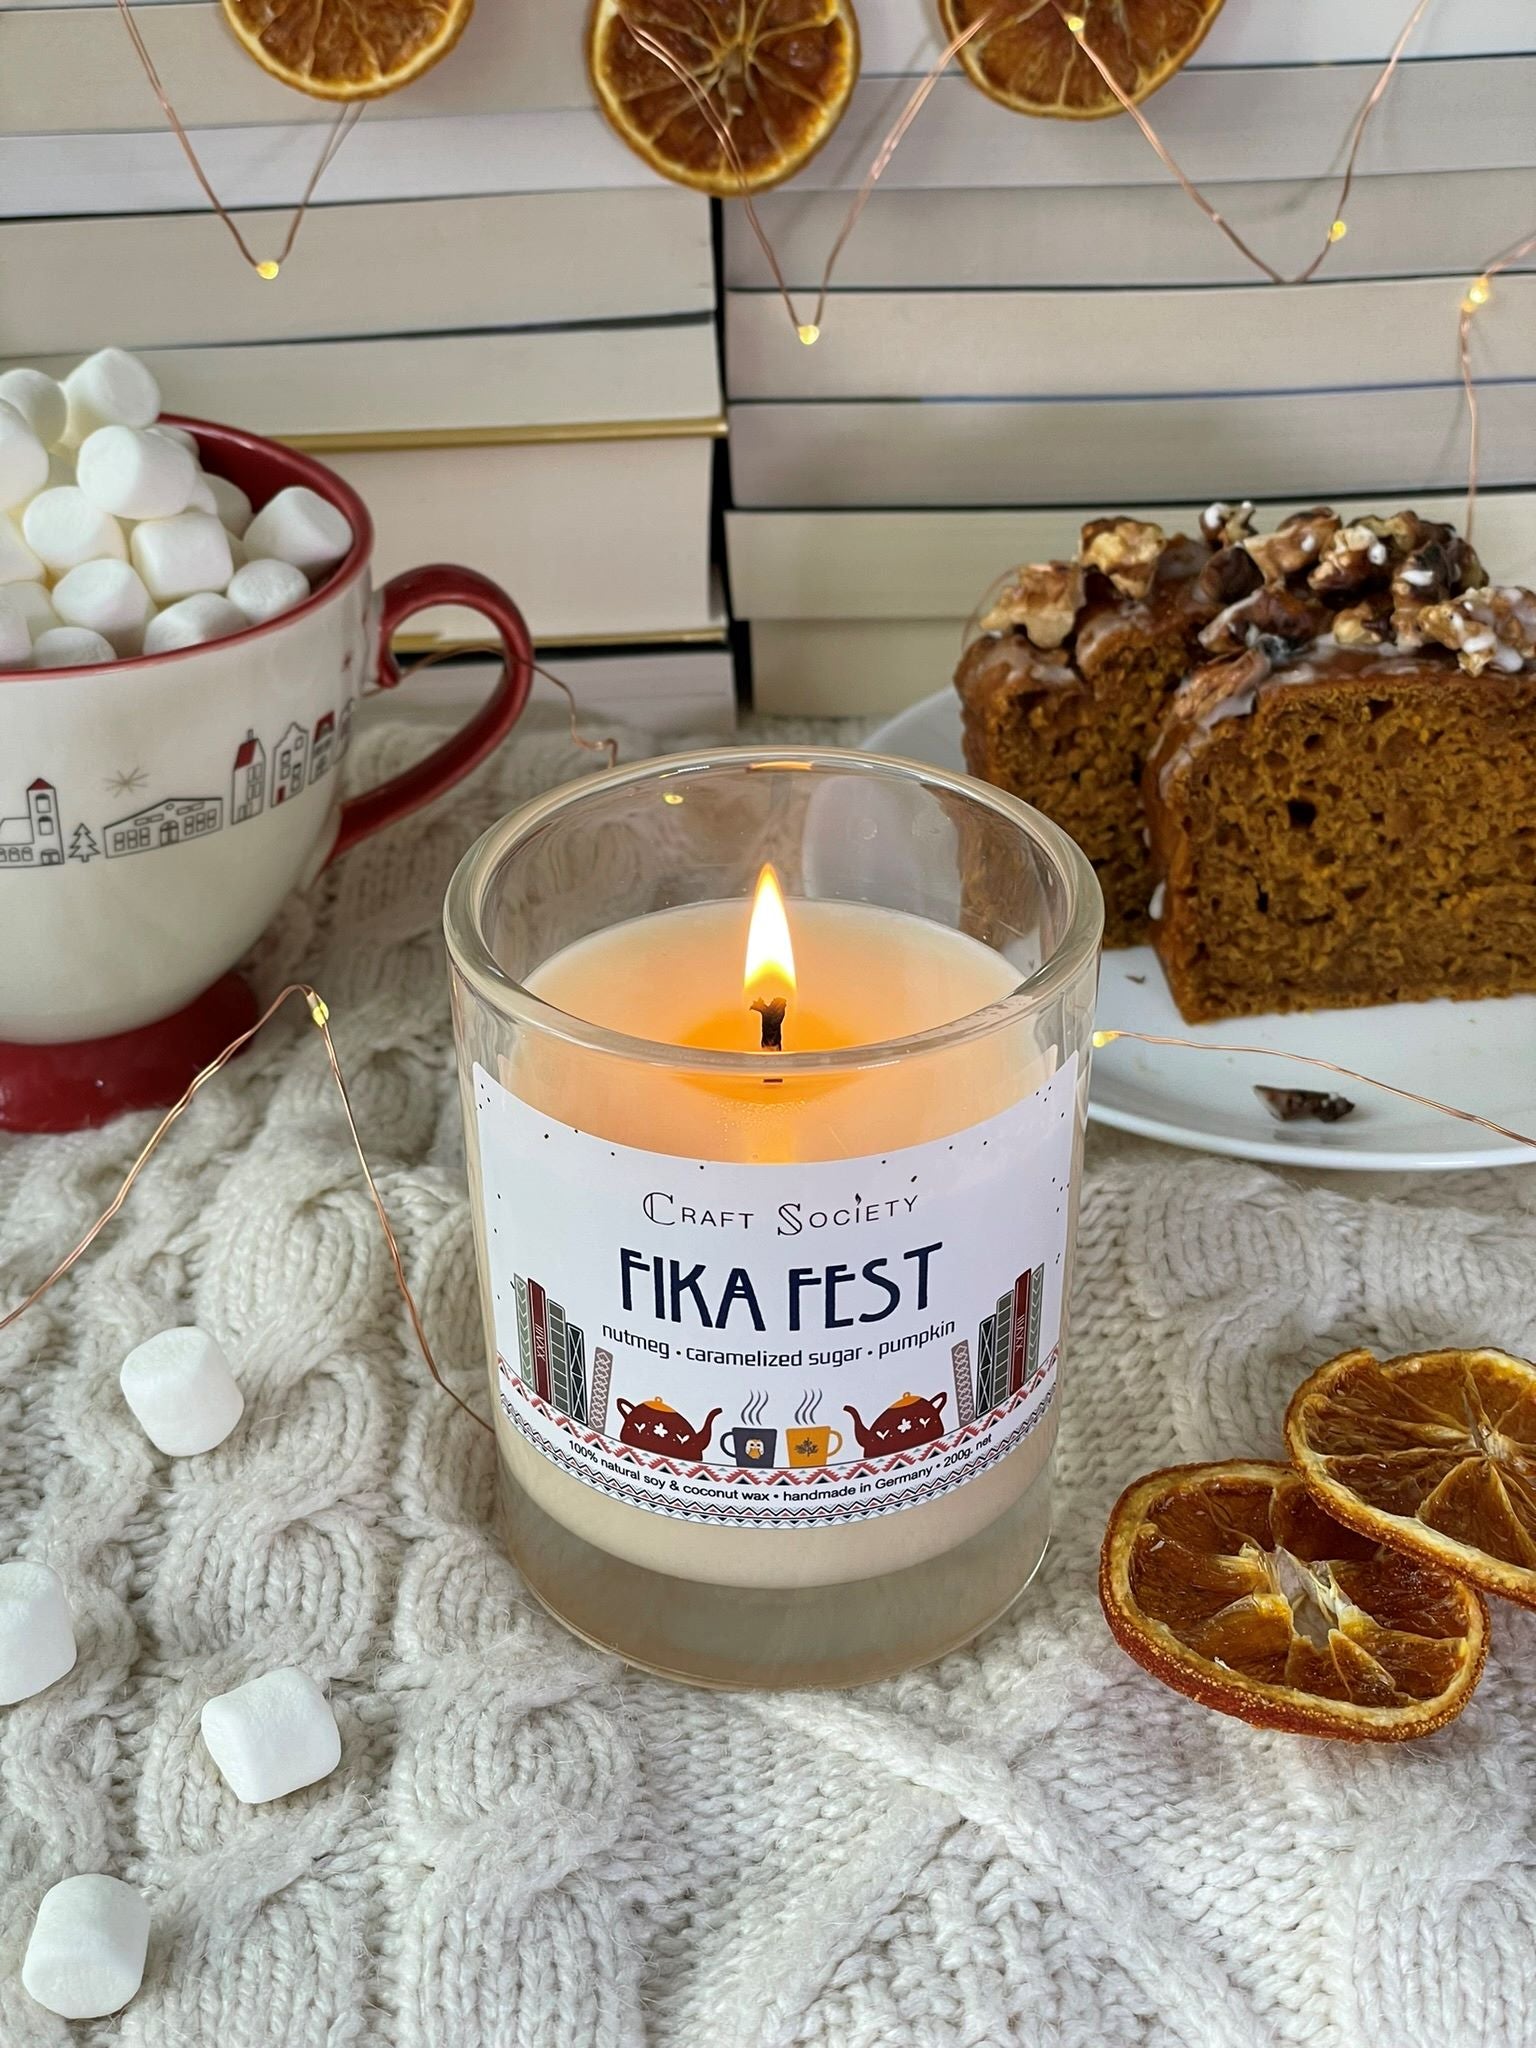 A burning scented candle made from vegetable wax on a decorated background with cake and marshmallows